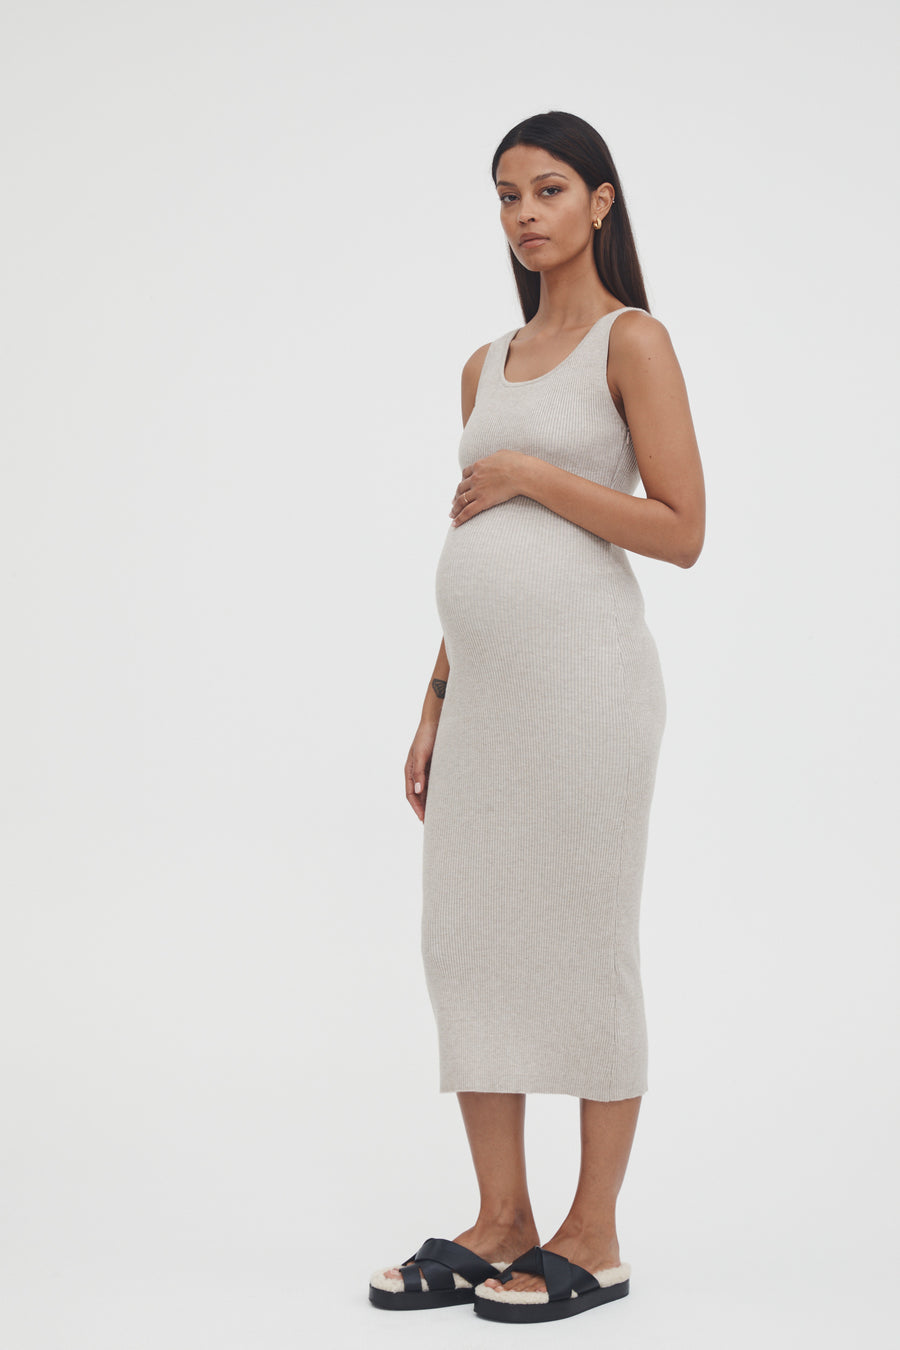 Maternity Baby Shower Dress (Taupe) 2